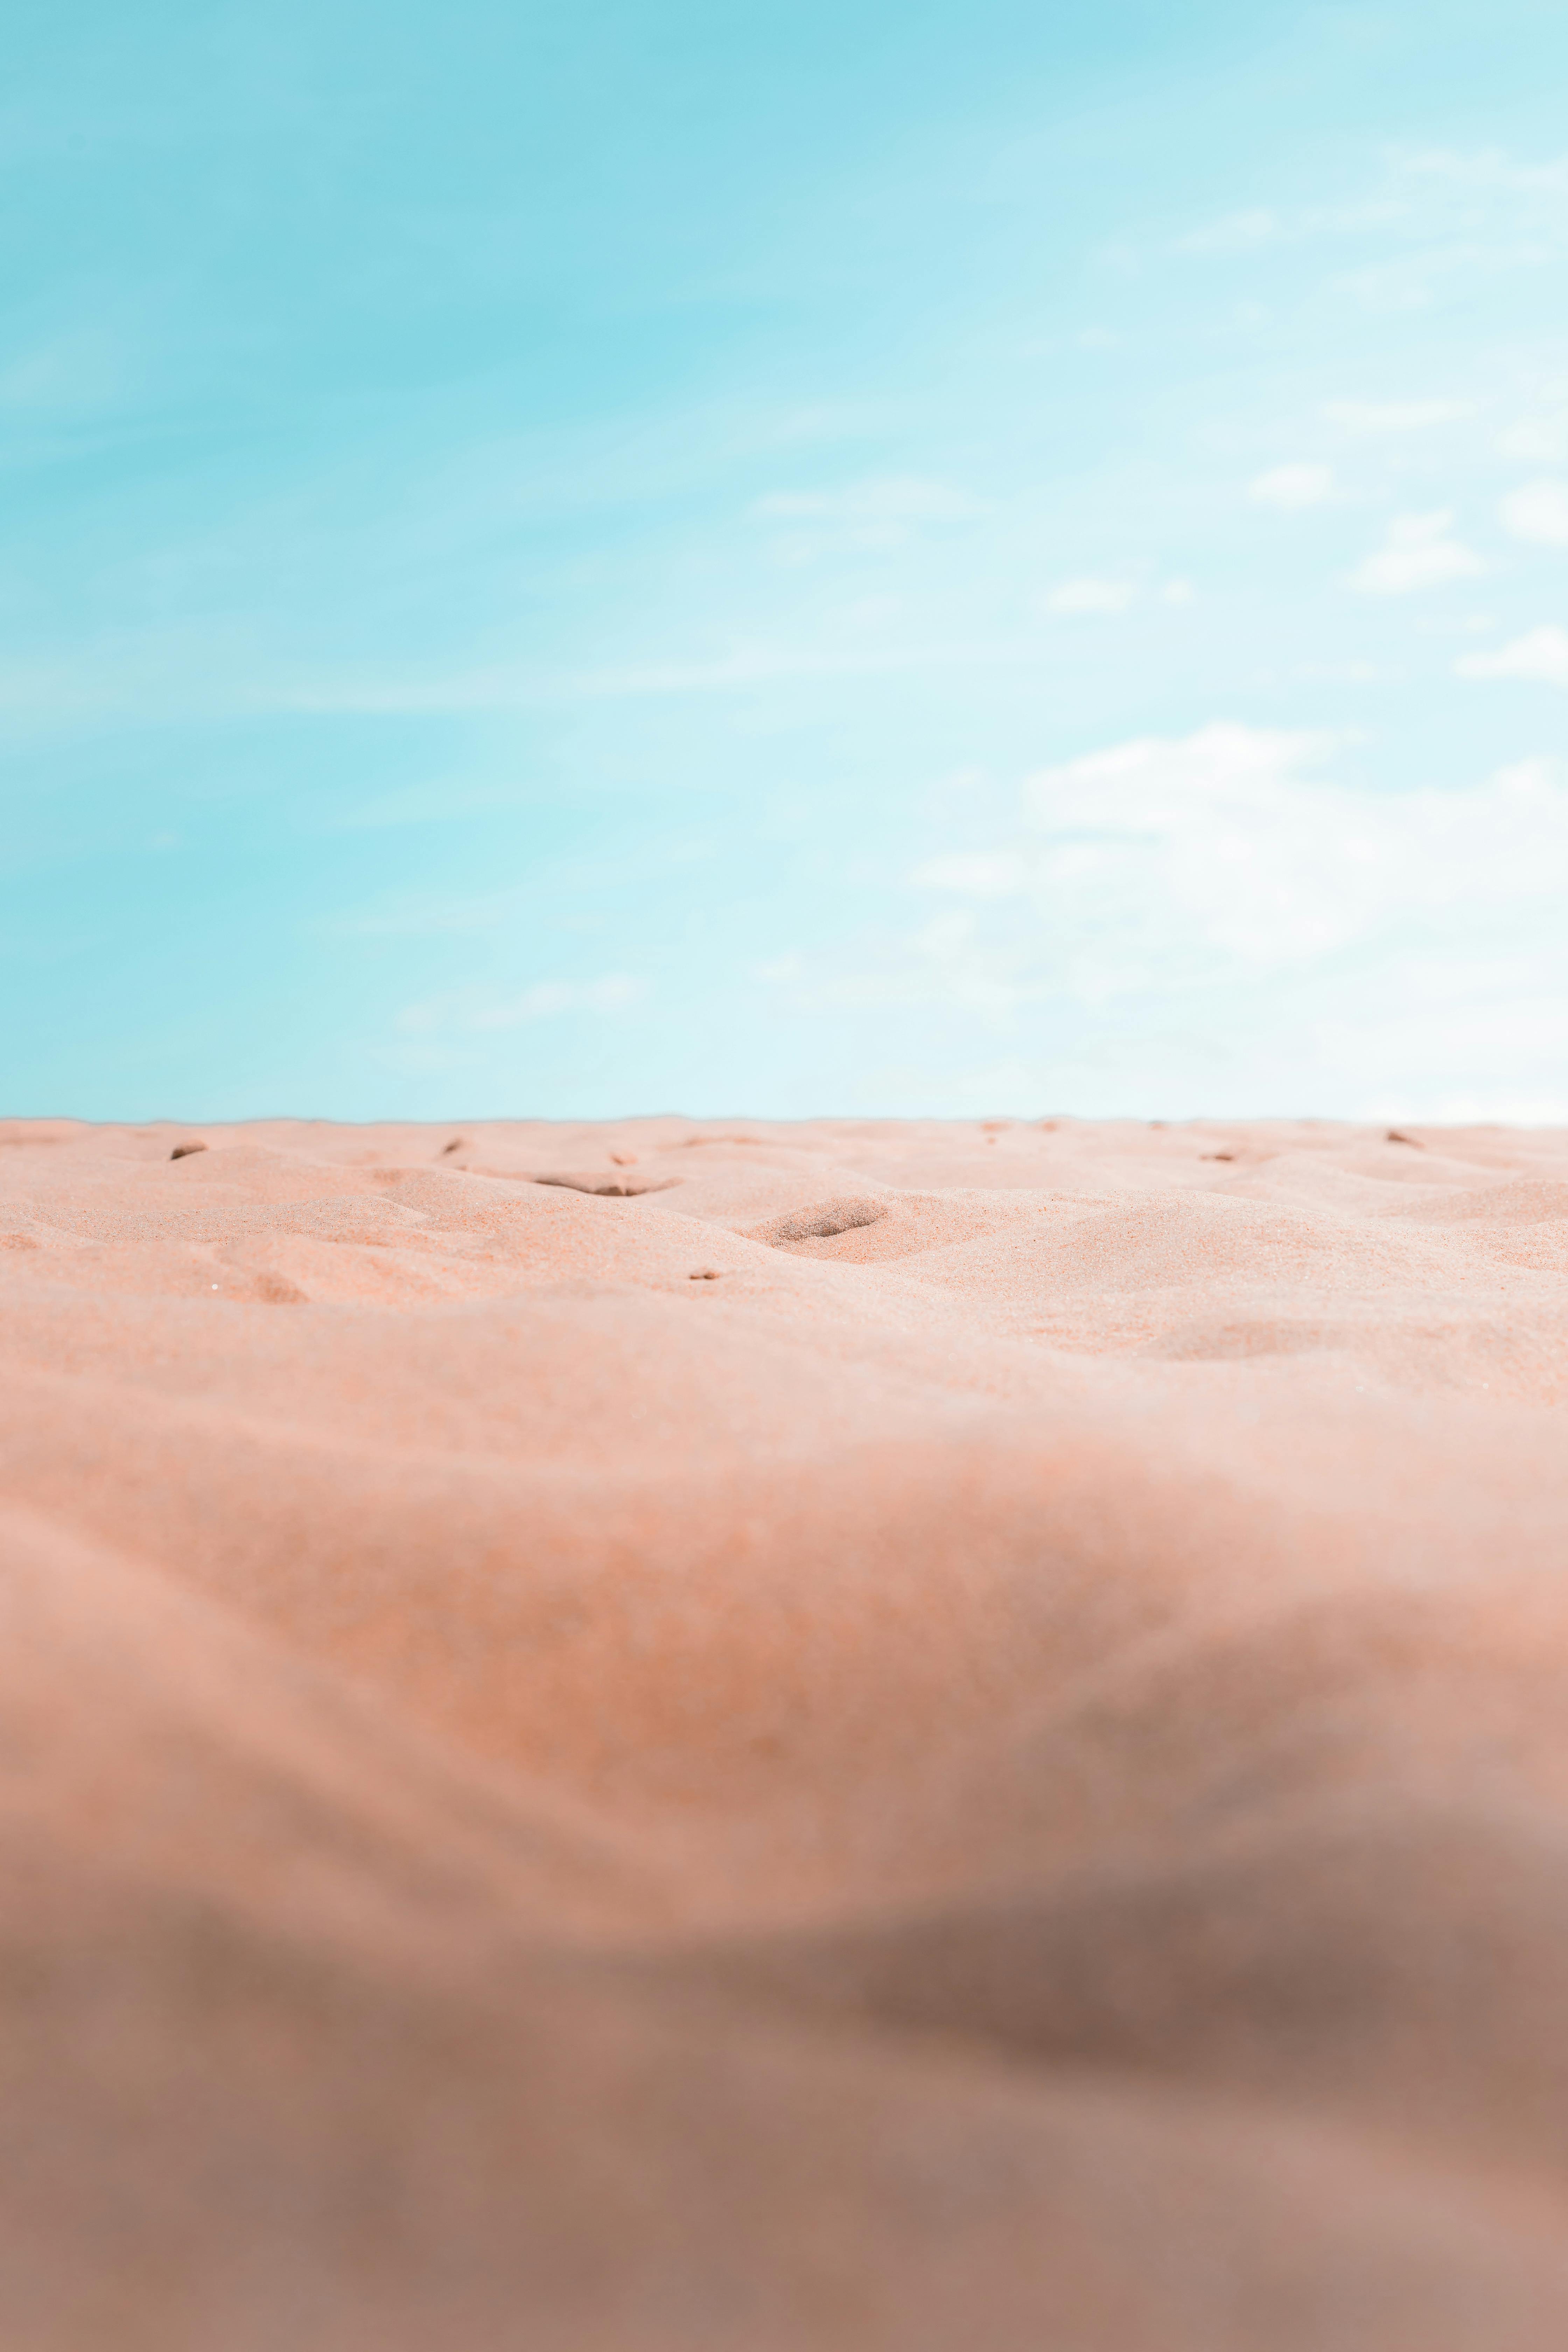 A sand dune with a blue sky in the background · Free Stock Photo